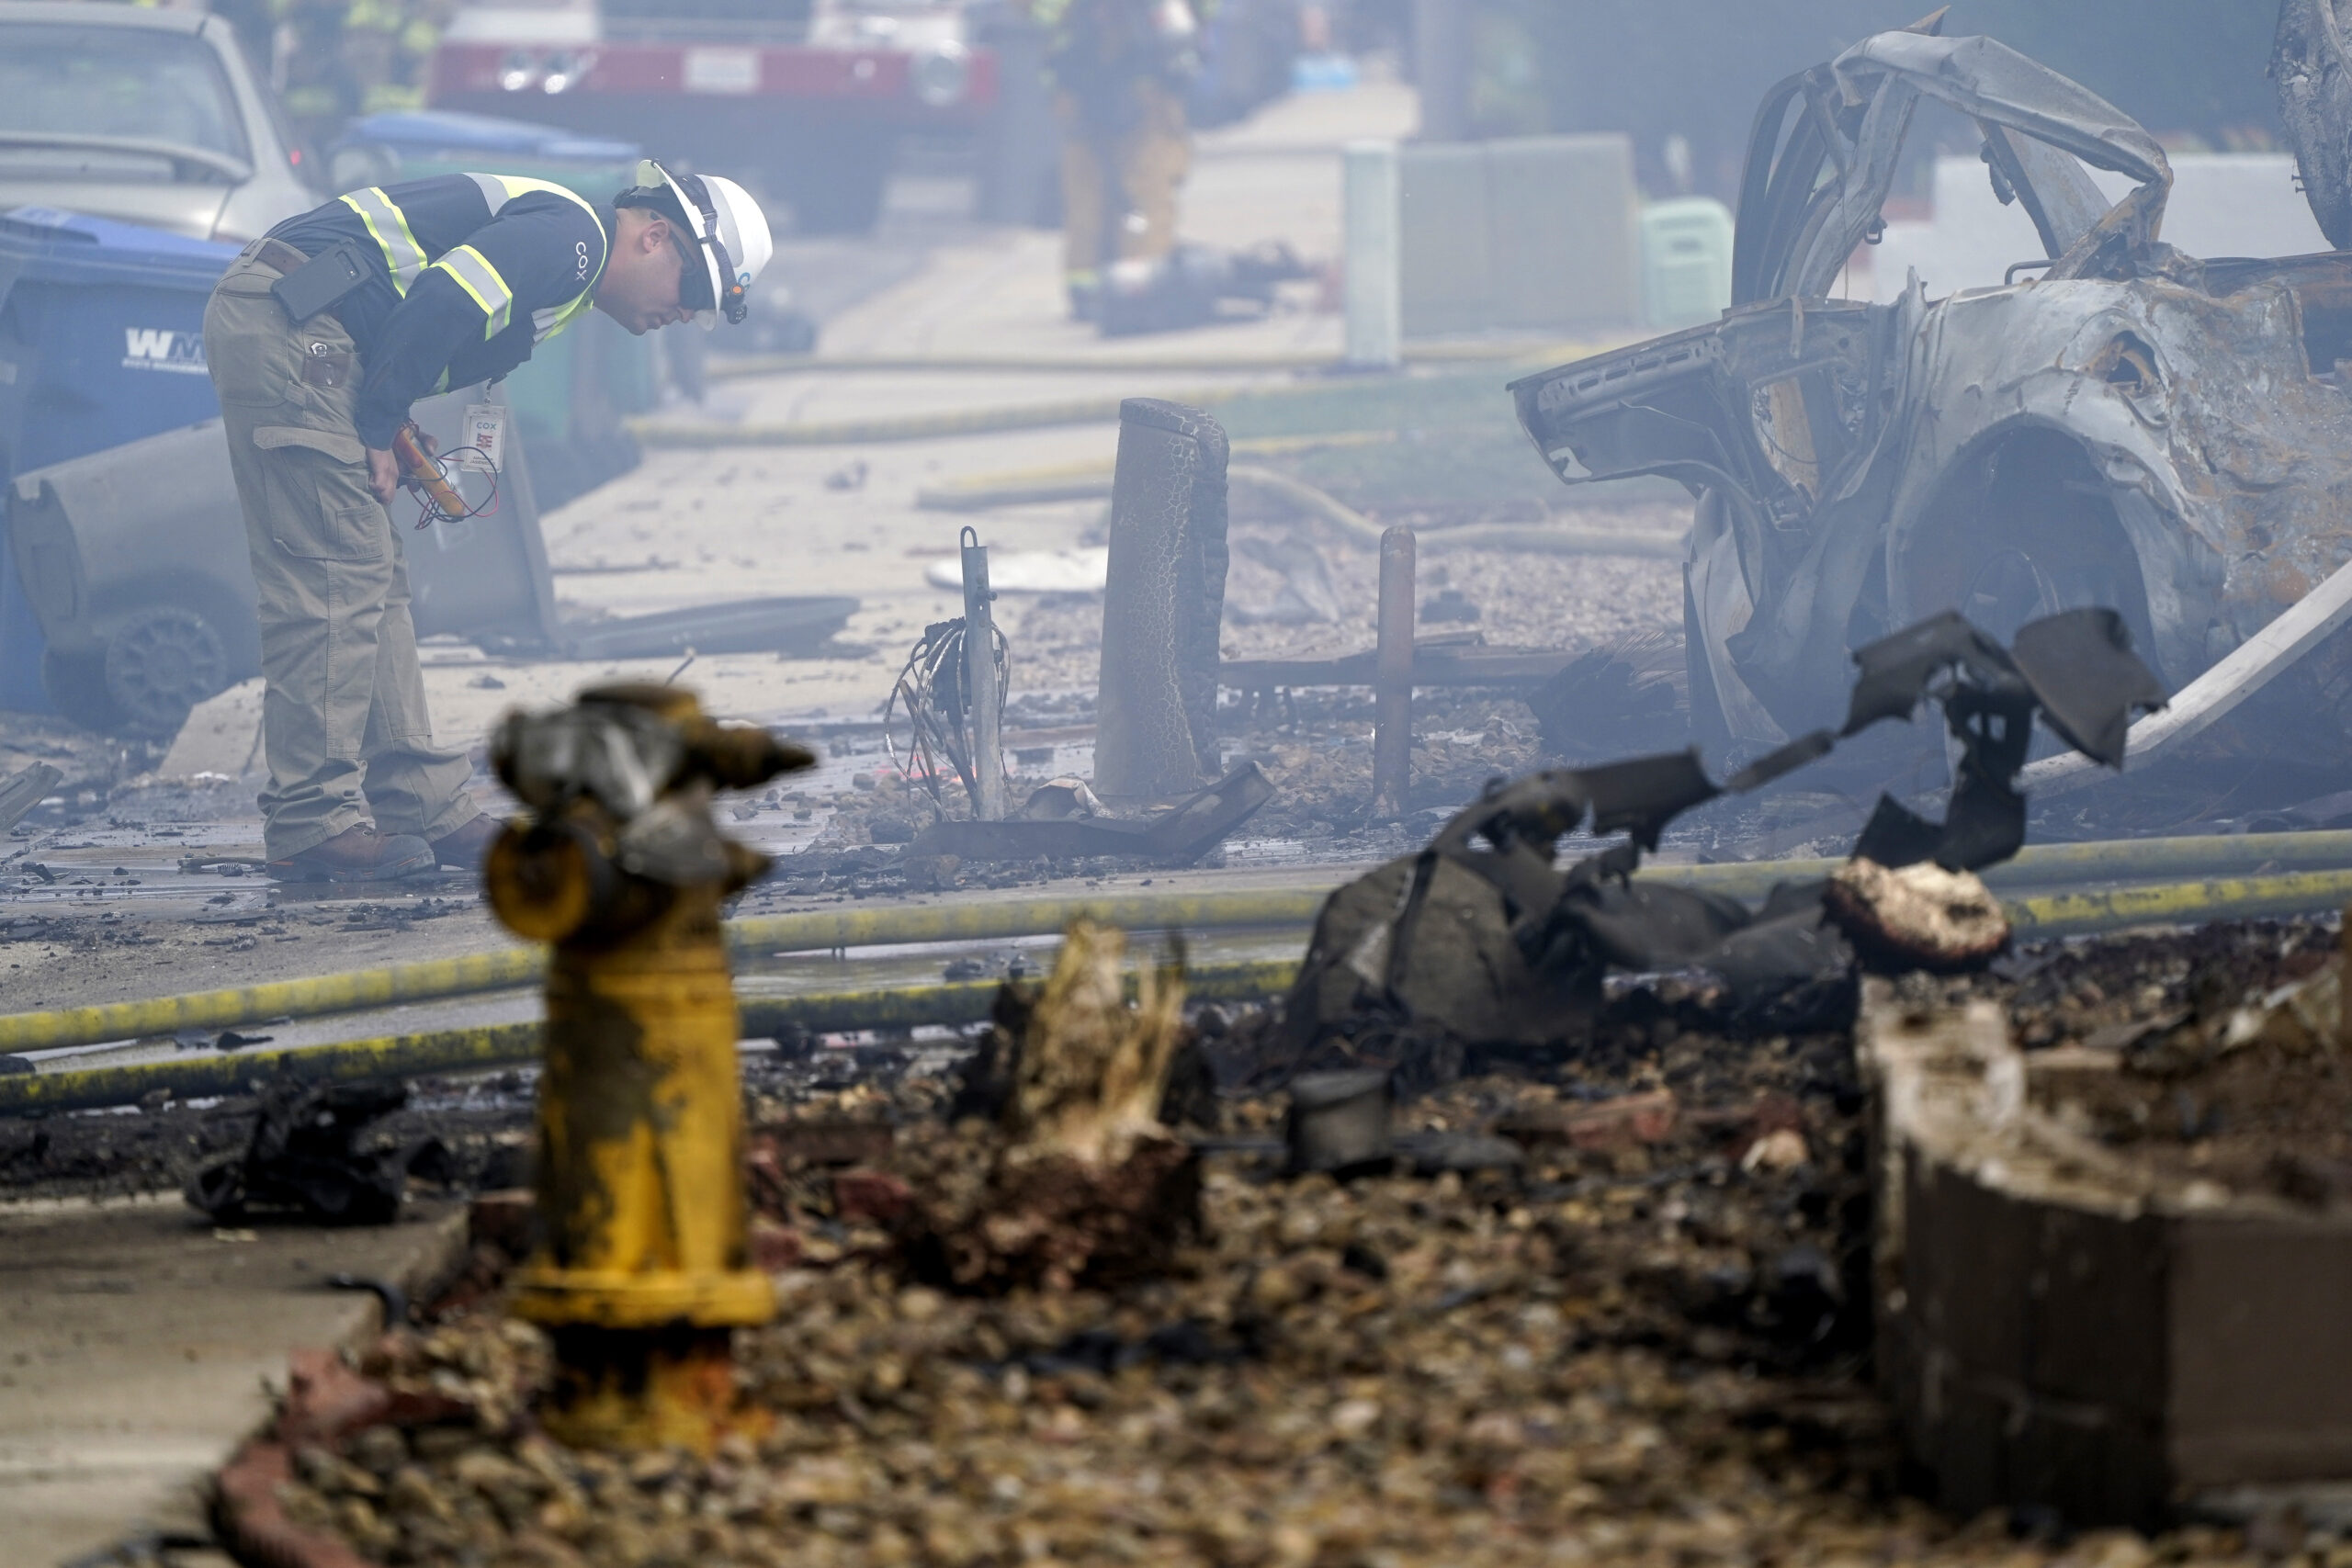 A fire official looks over the scene of a small plane crash, Monday, Oct. 11, 2021, in Santee, Calif. At least two people were killed and two others were injured when the plane crashed into a suburban Southern California neighborhood, setting two homes ablaze, authorities said. (AP Photo/Gregory Bull)